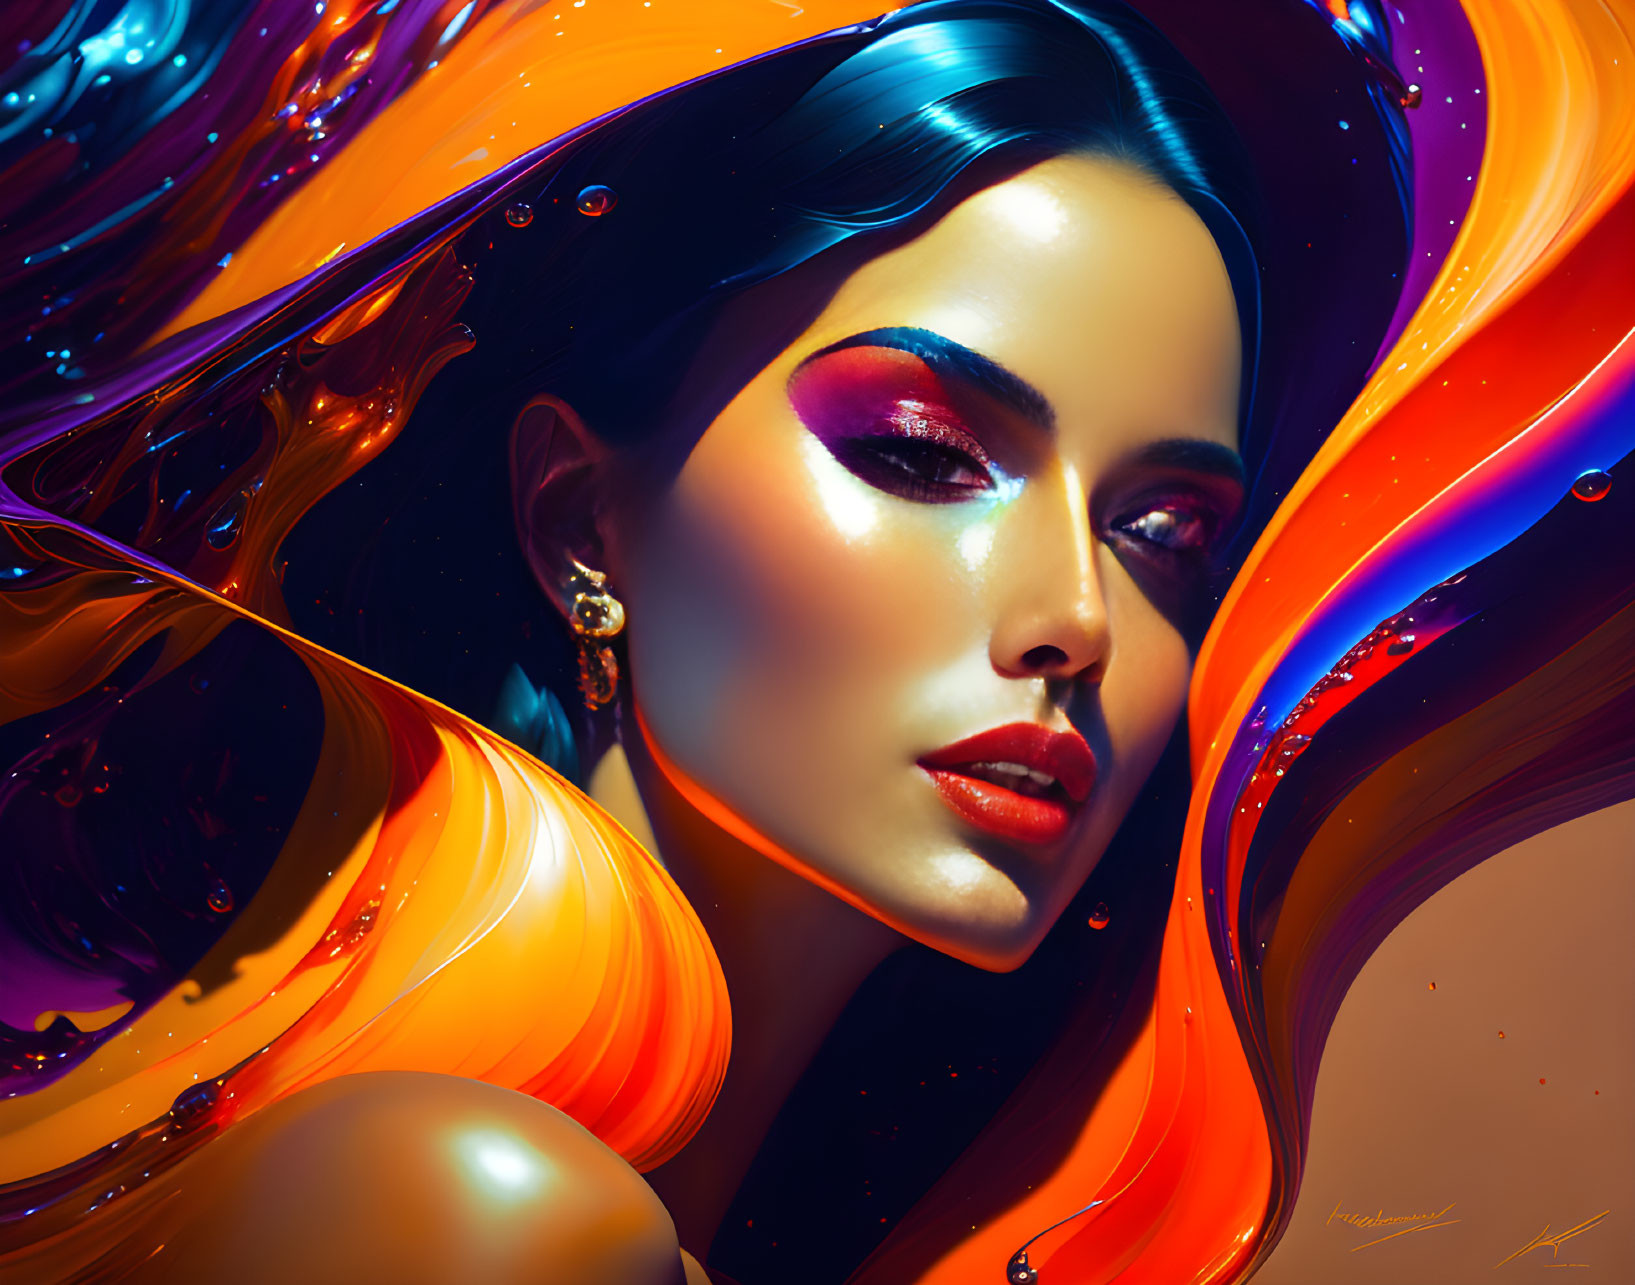  Beautiful Woman appearing from colorful liquid oi